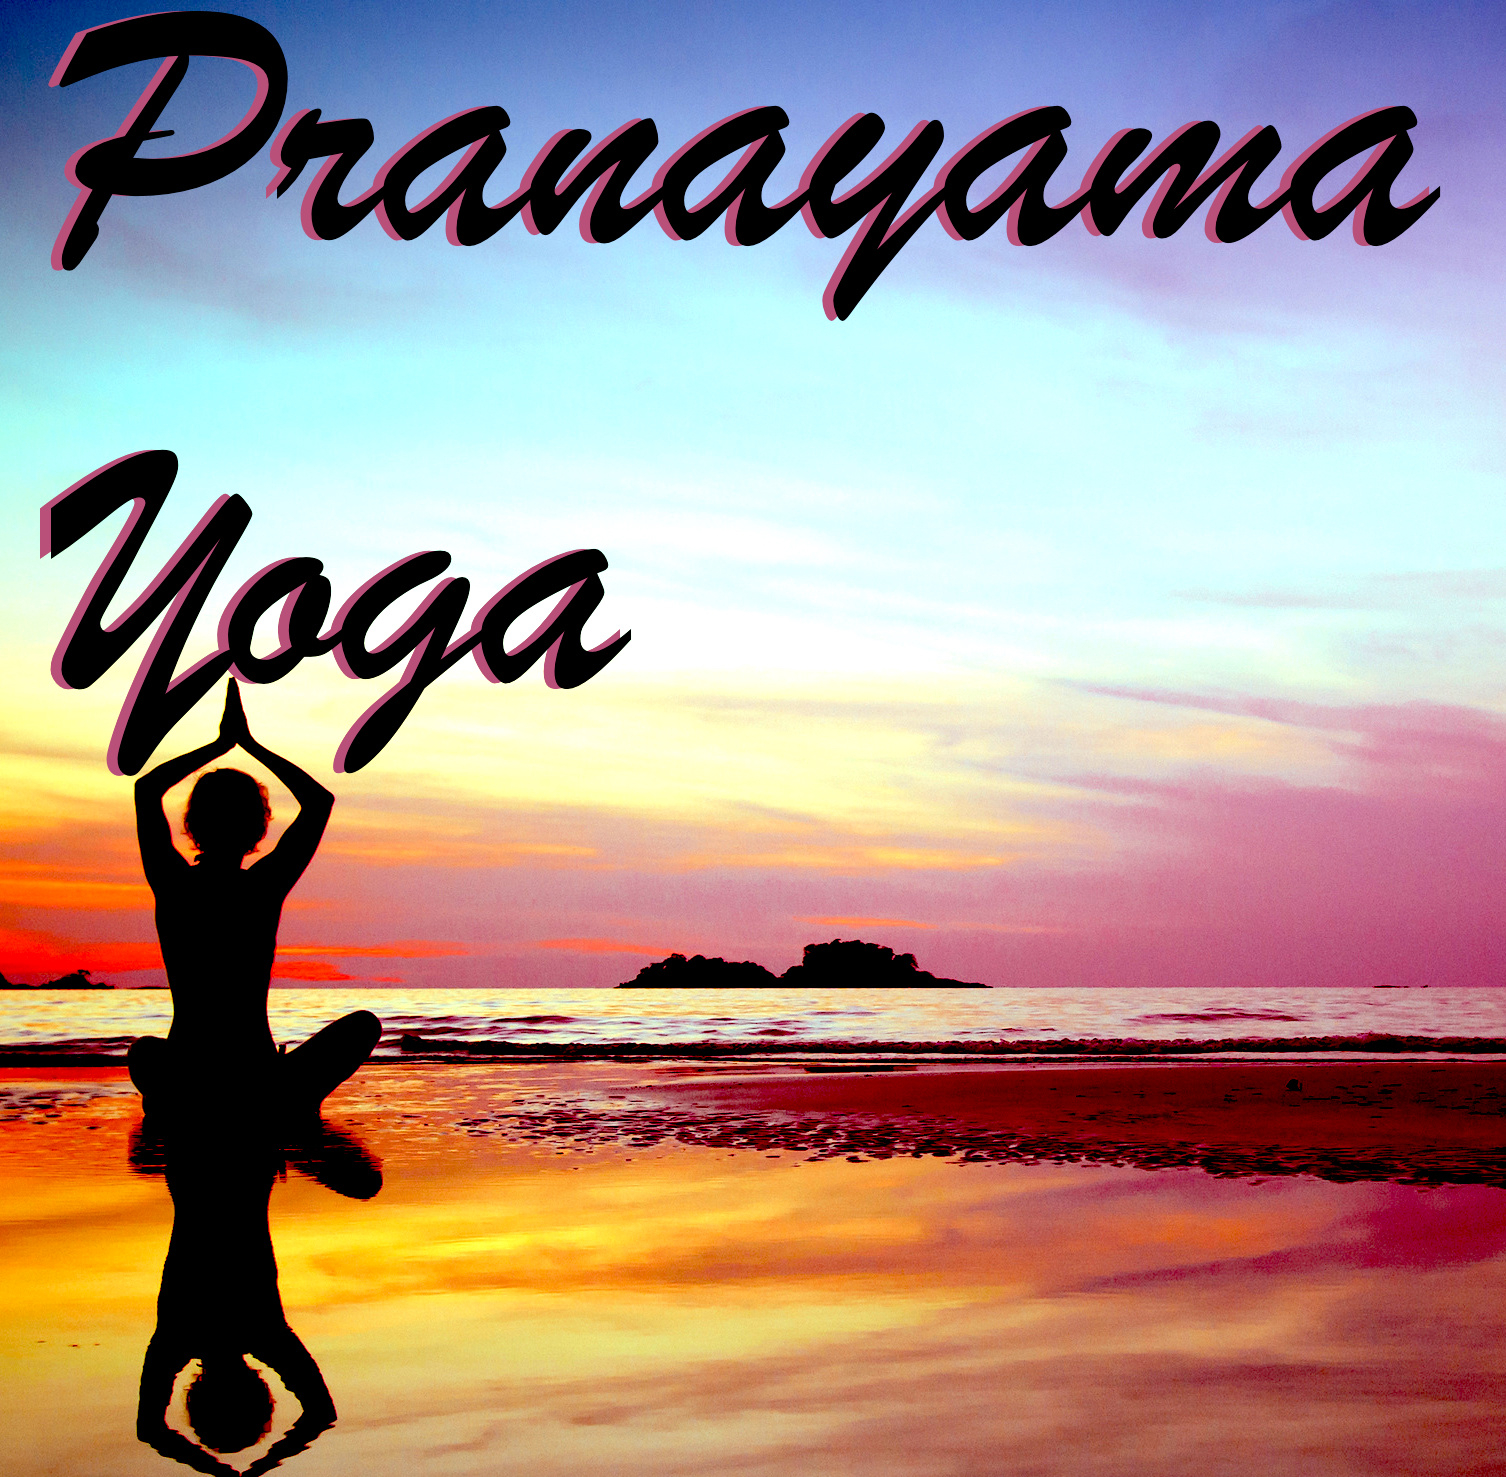 Pranayama Yoga: Spiritual Healing Mindfulness Meditation Music and Soothing Relaxing Sounds, Yoga Breathing for Concentration and Study